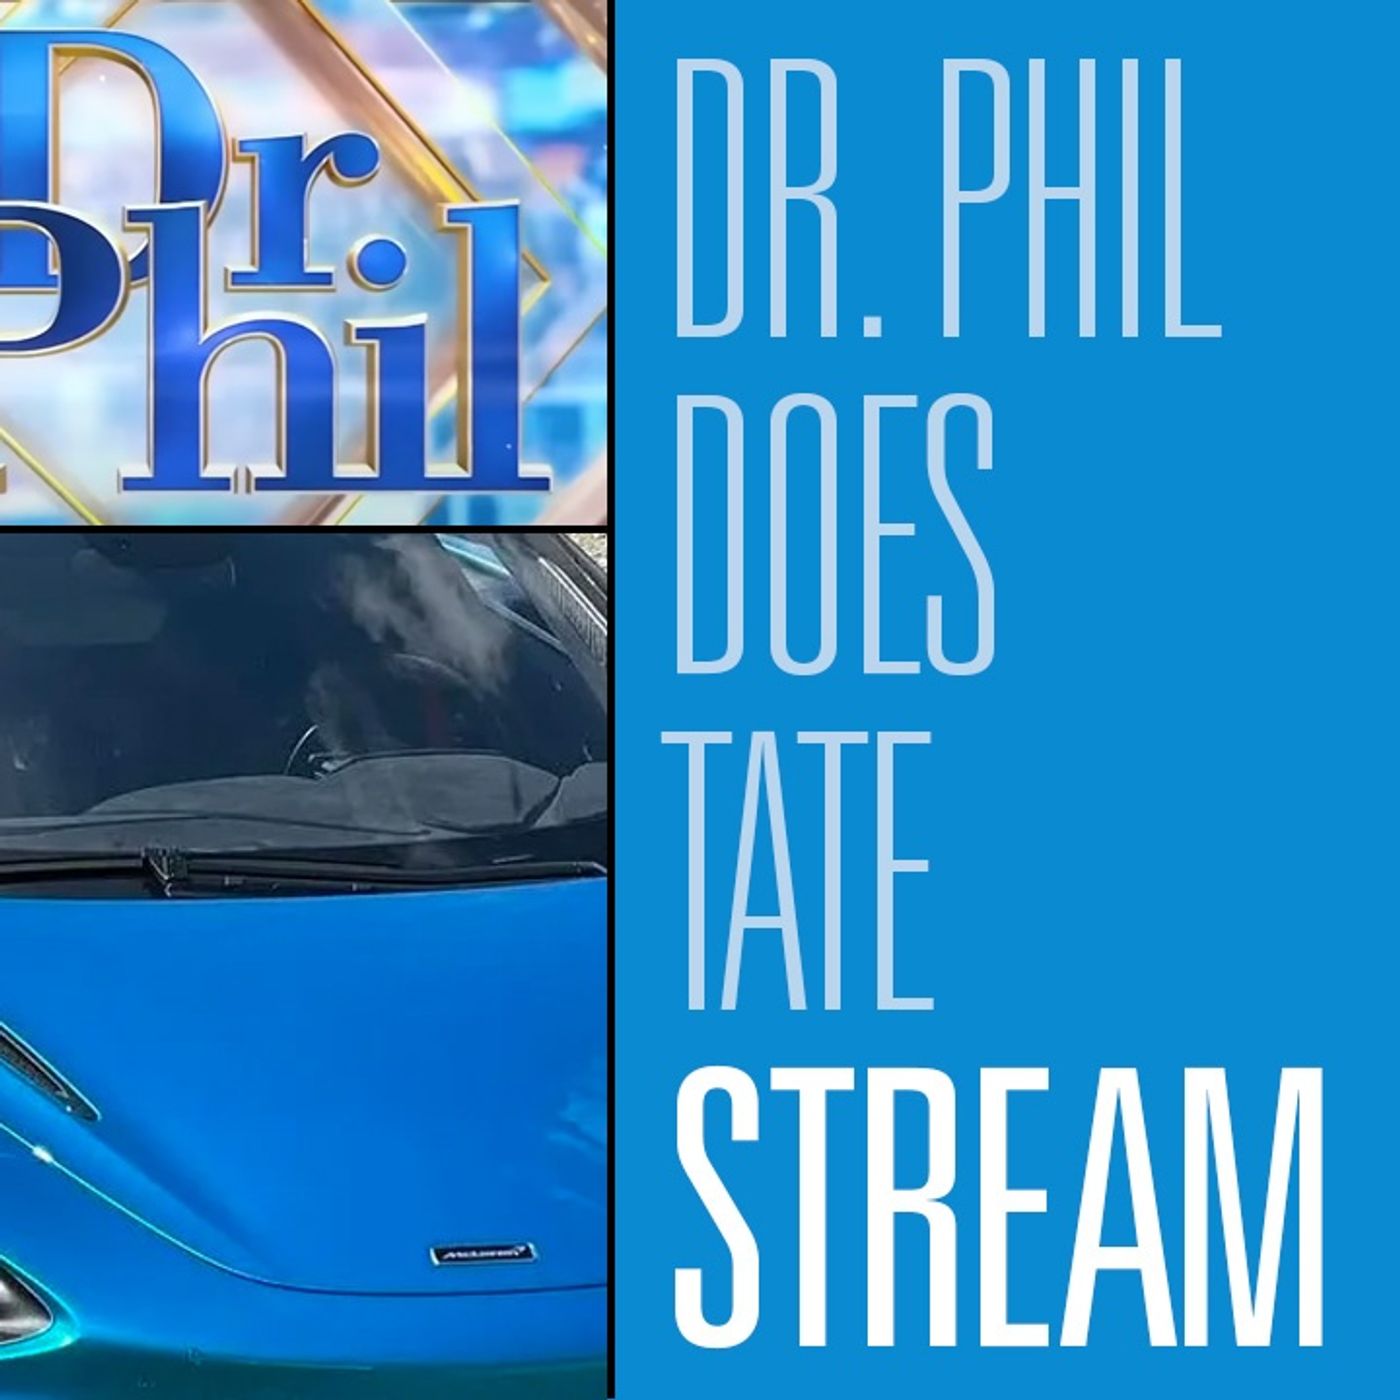 Dr. Phil talks men and Andrew Tate. Let's observe his wisdom | Alison and Hannah 1